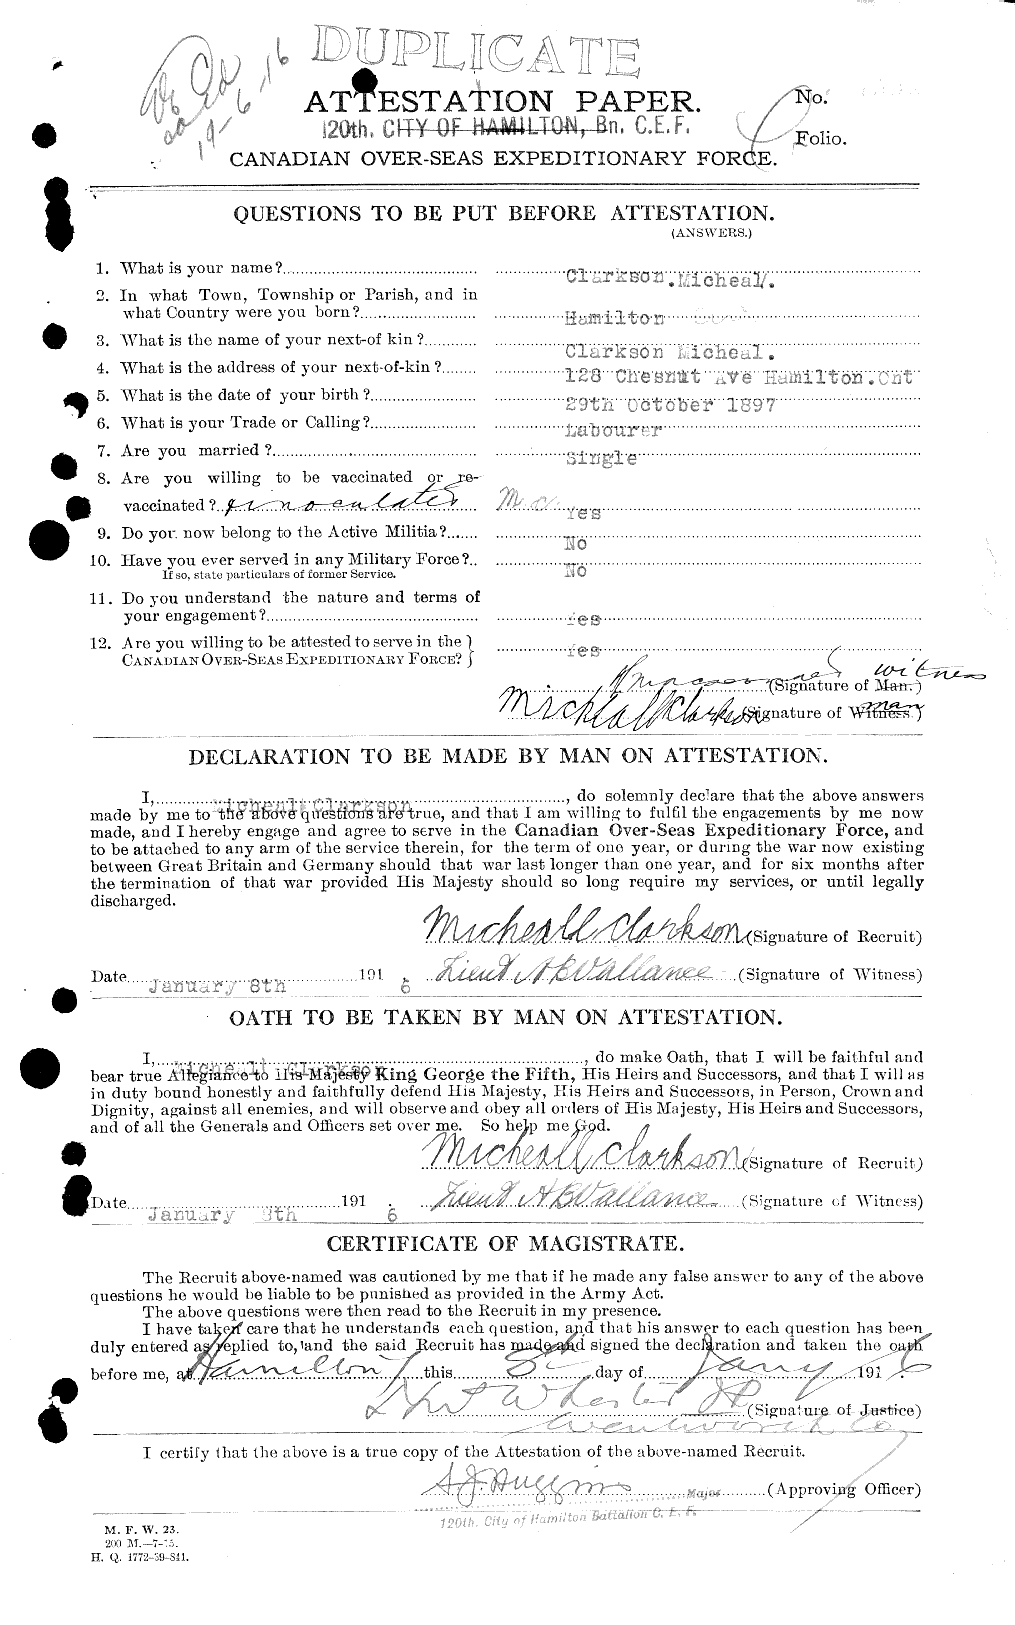 Personnel Records of the First World War - CEF 021464a